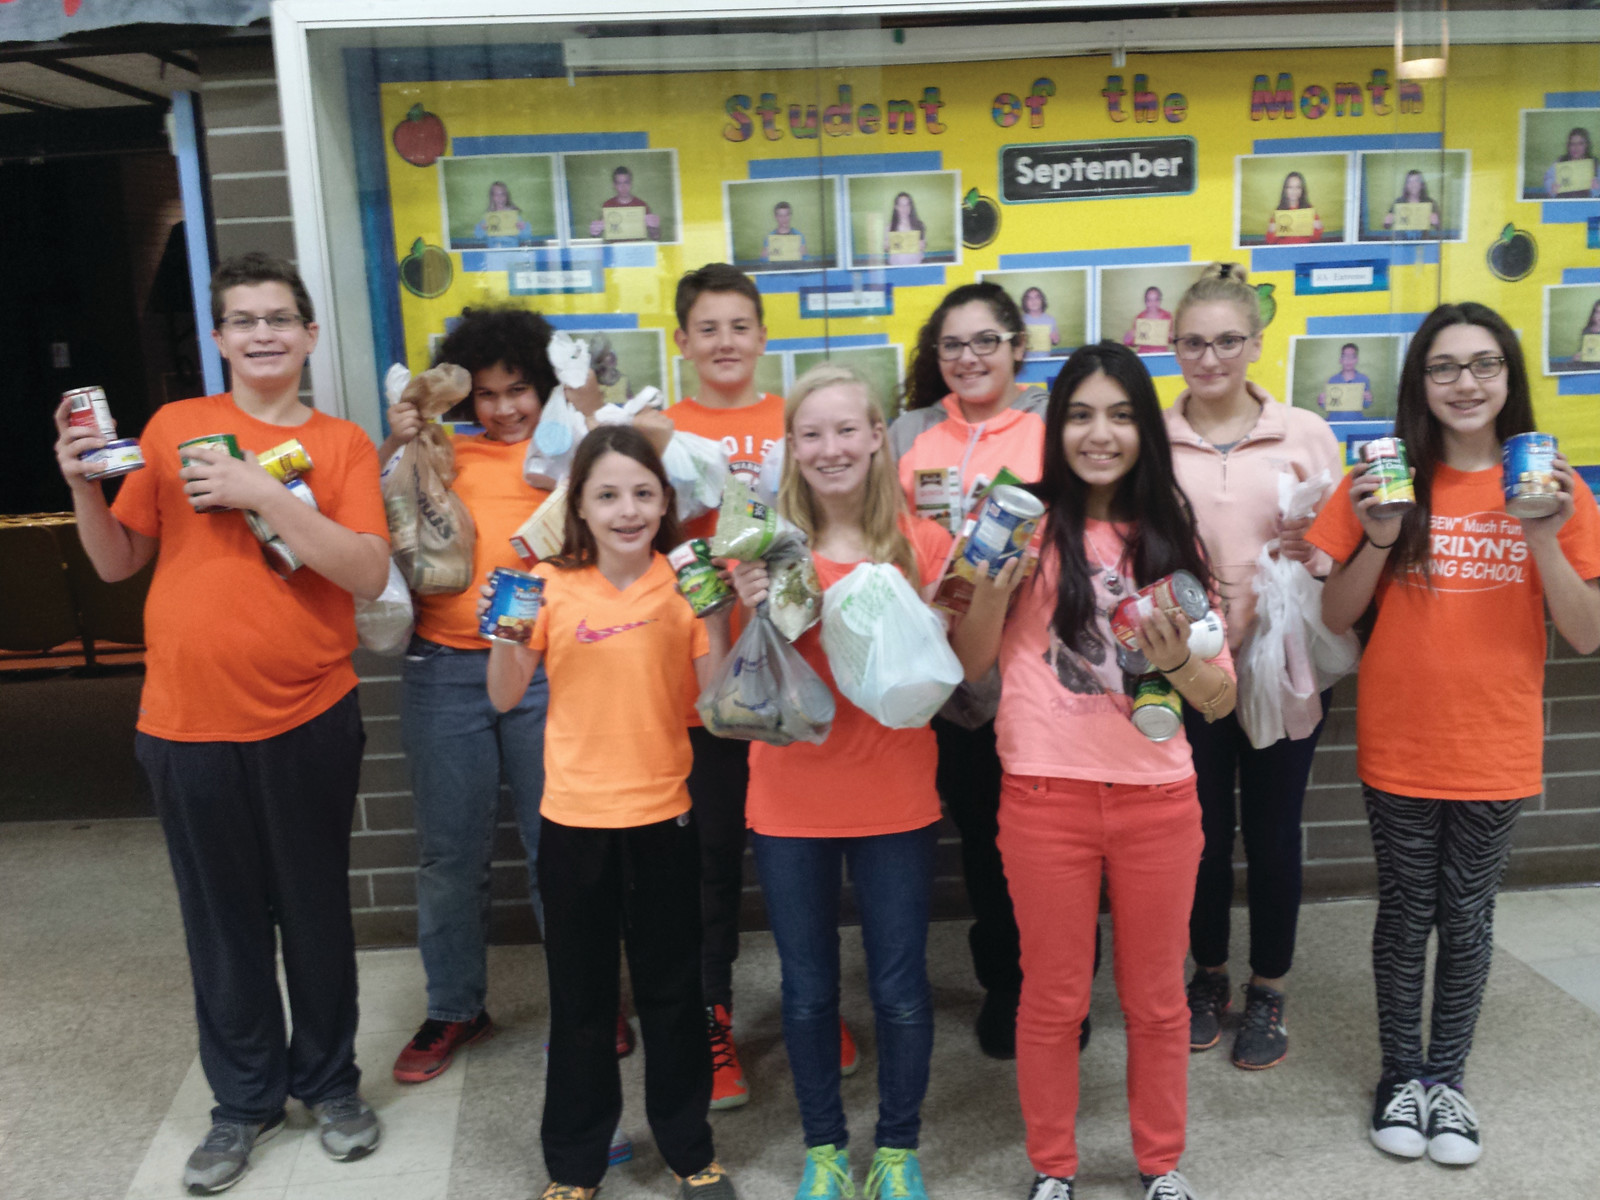 AN ORIGINAL FOUNDER: Elizabeth Cowart, one of the three original founders of the Cranston “Go Orange” event, poses with several of her peers at Western Hills Middle School as they show just some of the hundreds of non-perishable food items collected in this year’s drive, which began on Oct. 28. The student council at Western Hills also asked students to bring canned goods to the first school dance on Oct. 30.